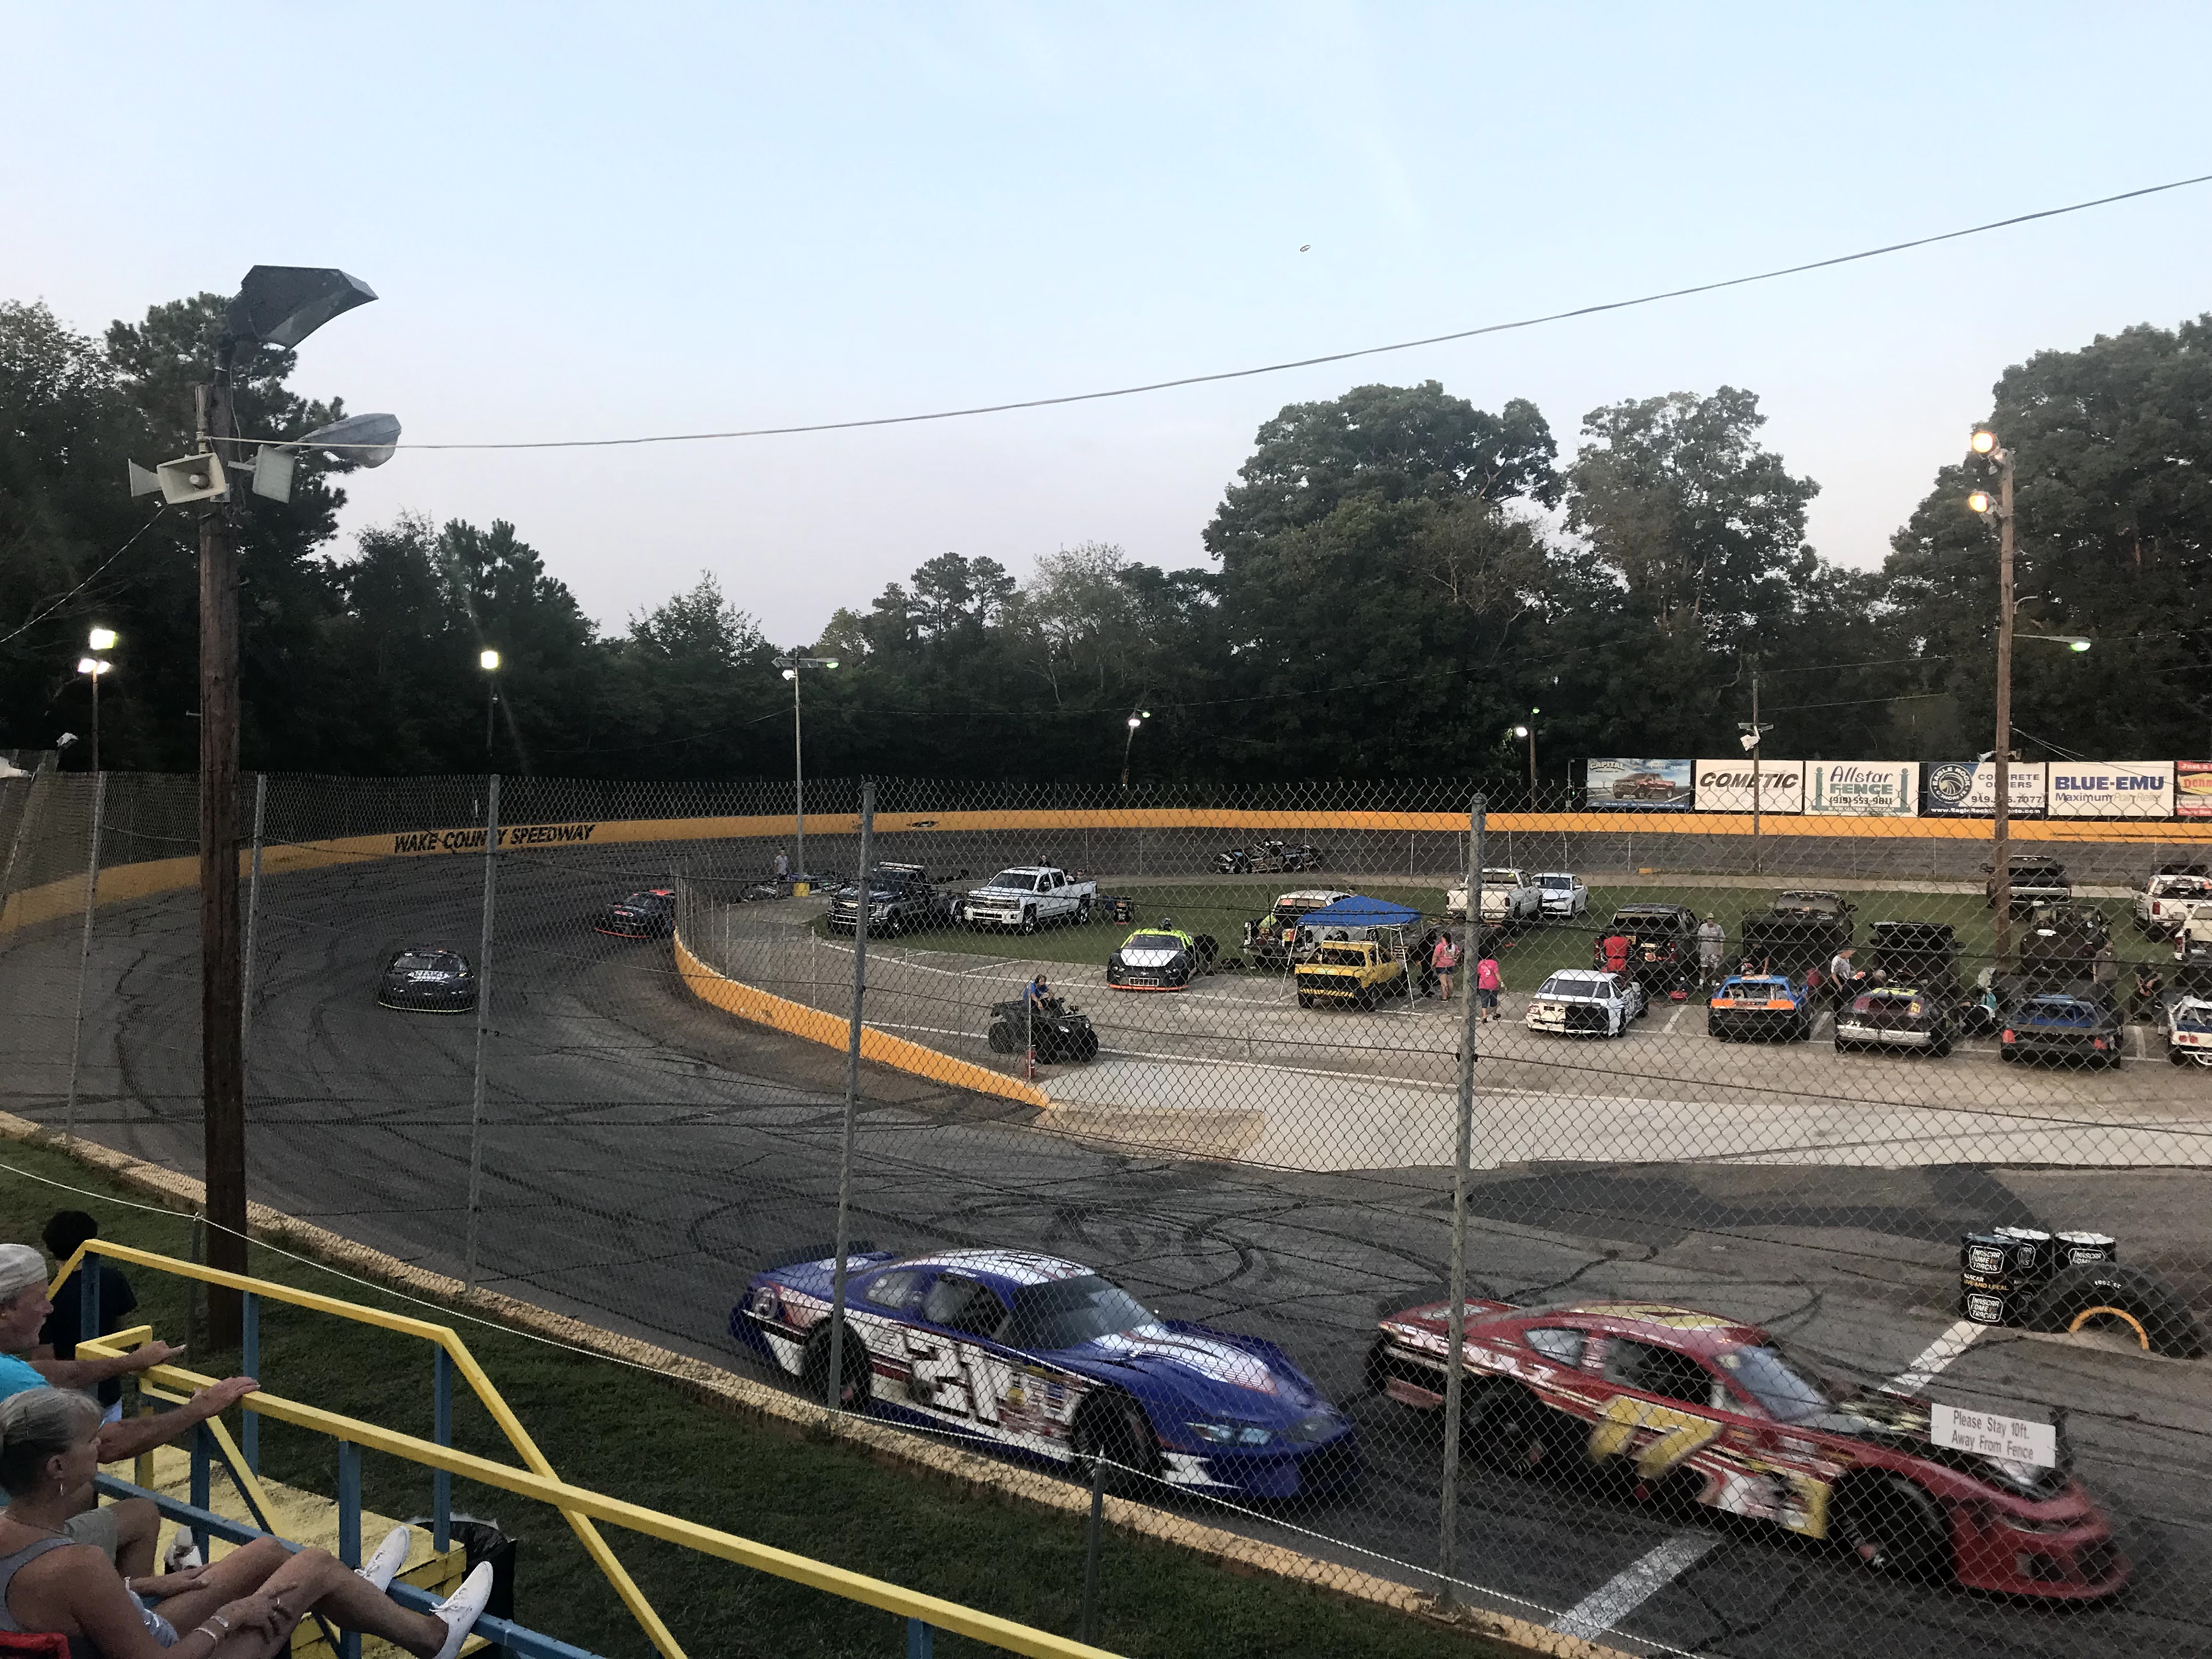 Wake County Speedway "America's Favorite Bullring" is a